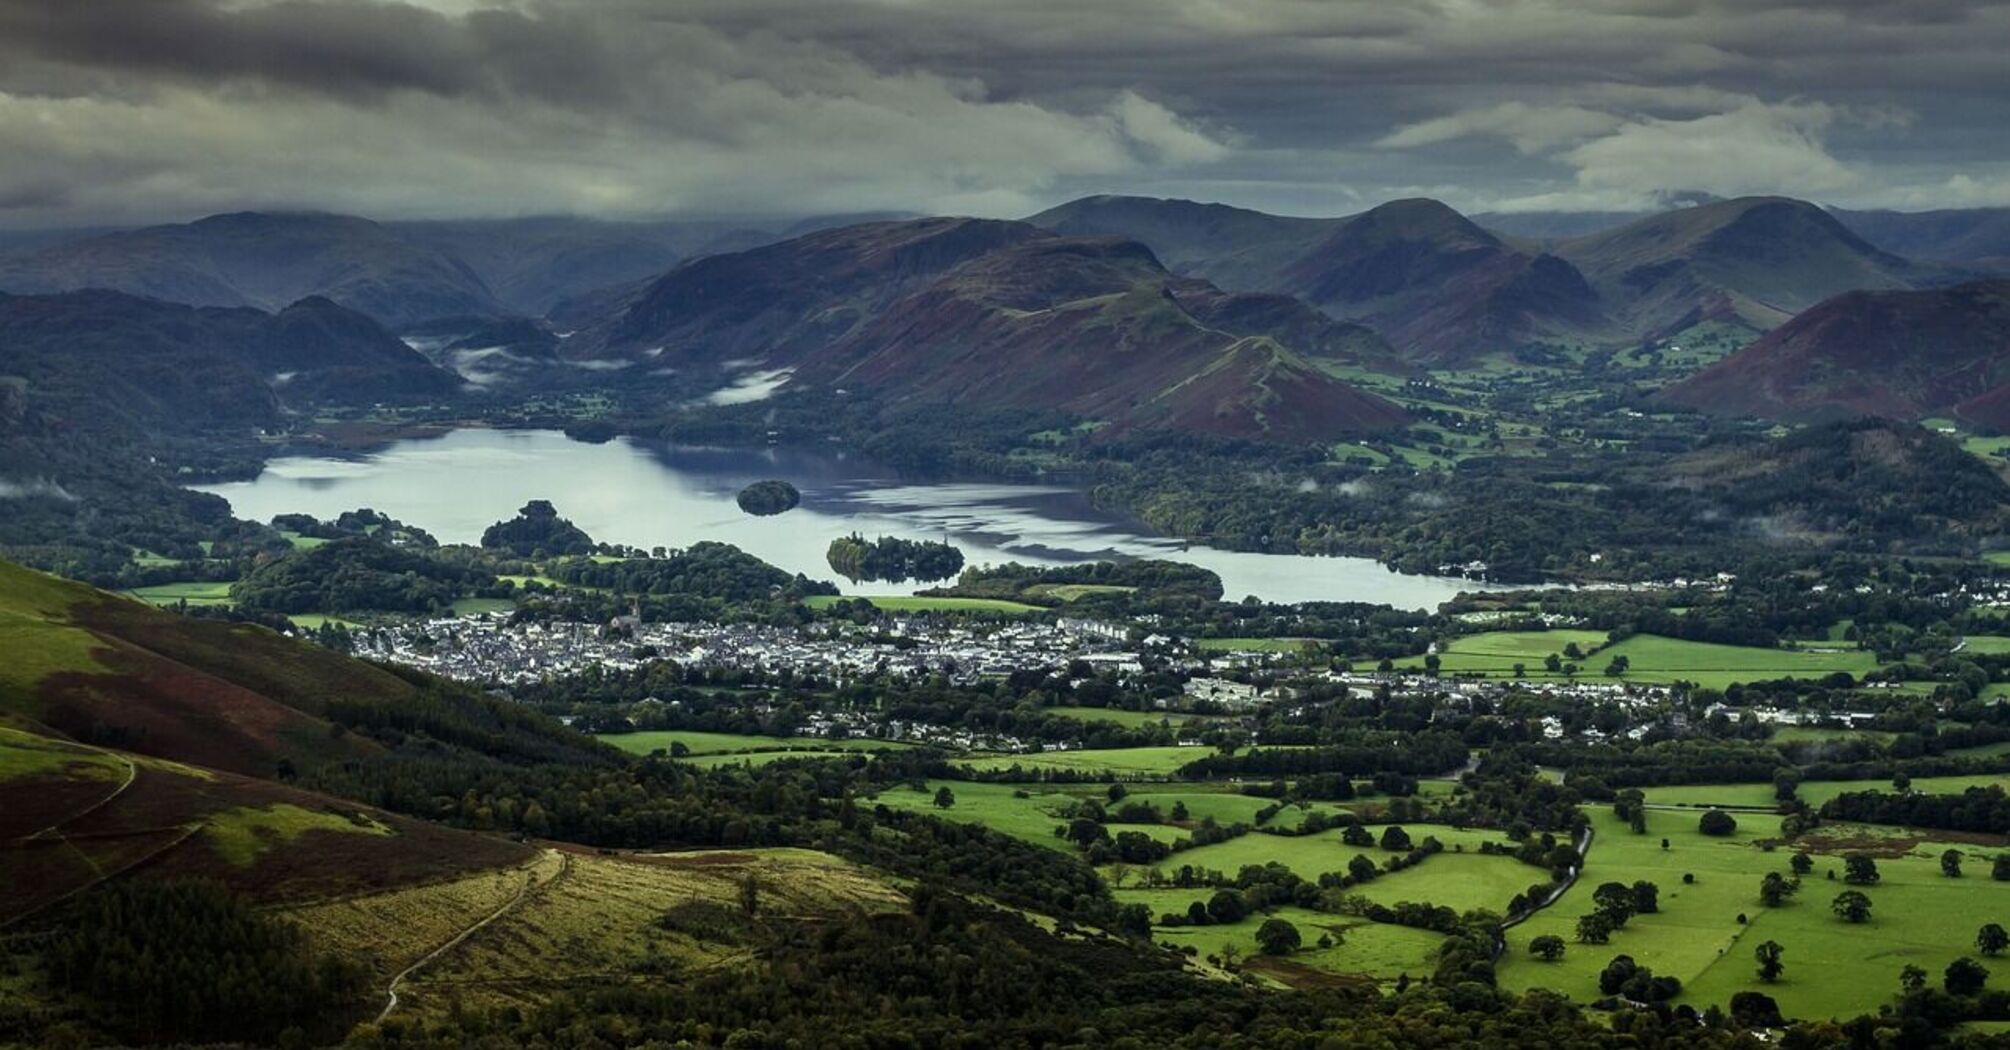 Lake District: tourists by car are asked to make a request